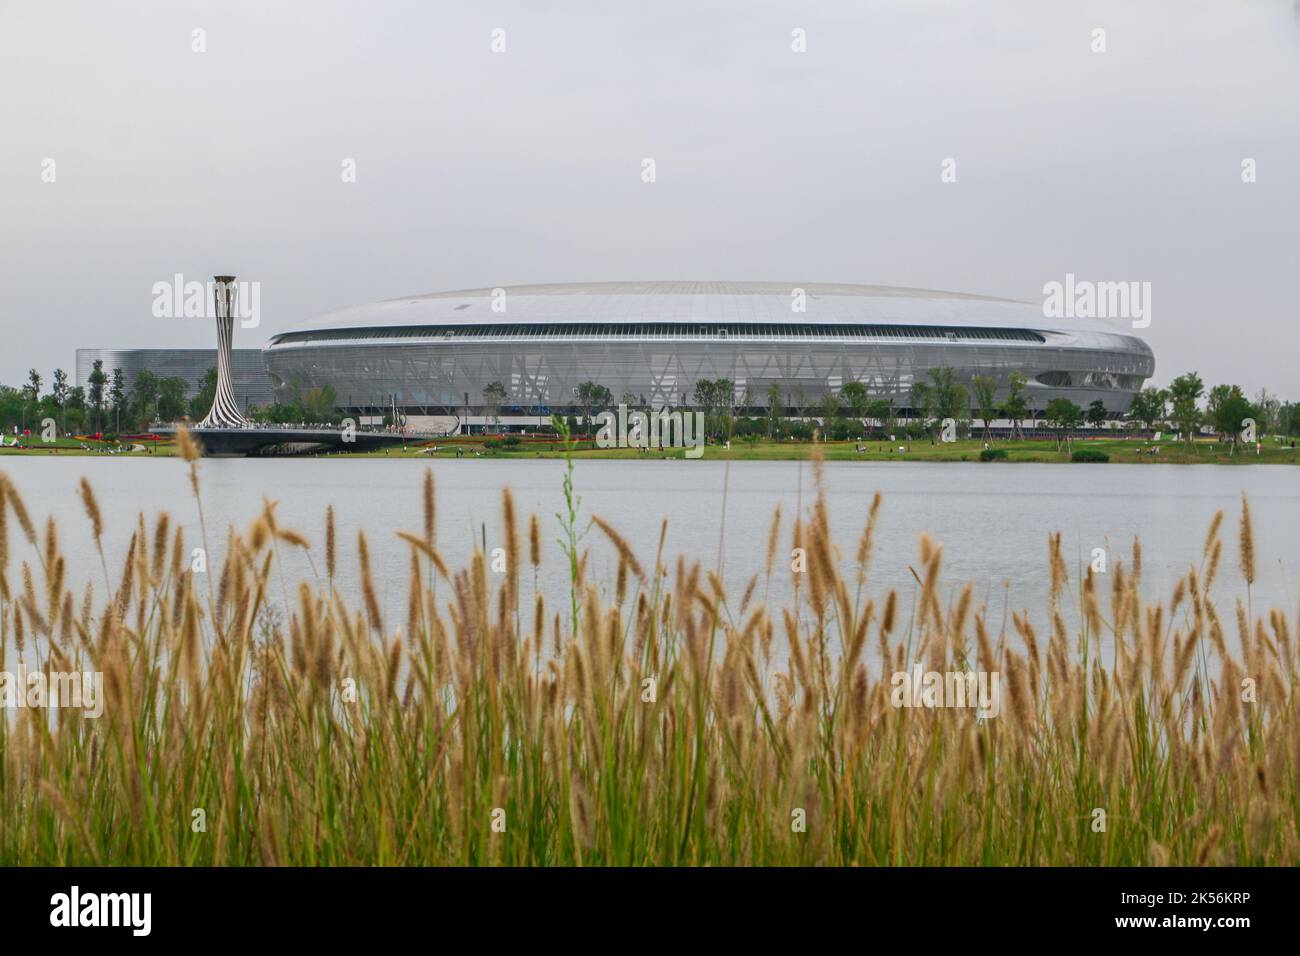 Chengdu, China - 4th October 2022: View of Dong’an Stadium from Dong’an Lake, one of the main venues of the Chengdu 2021 World University Games Stock Photo